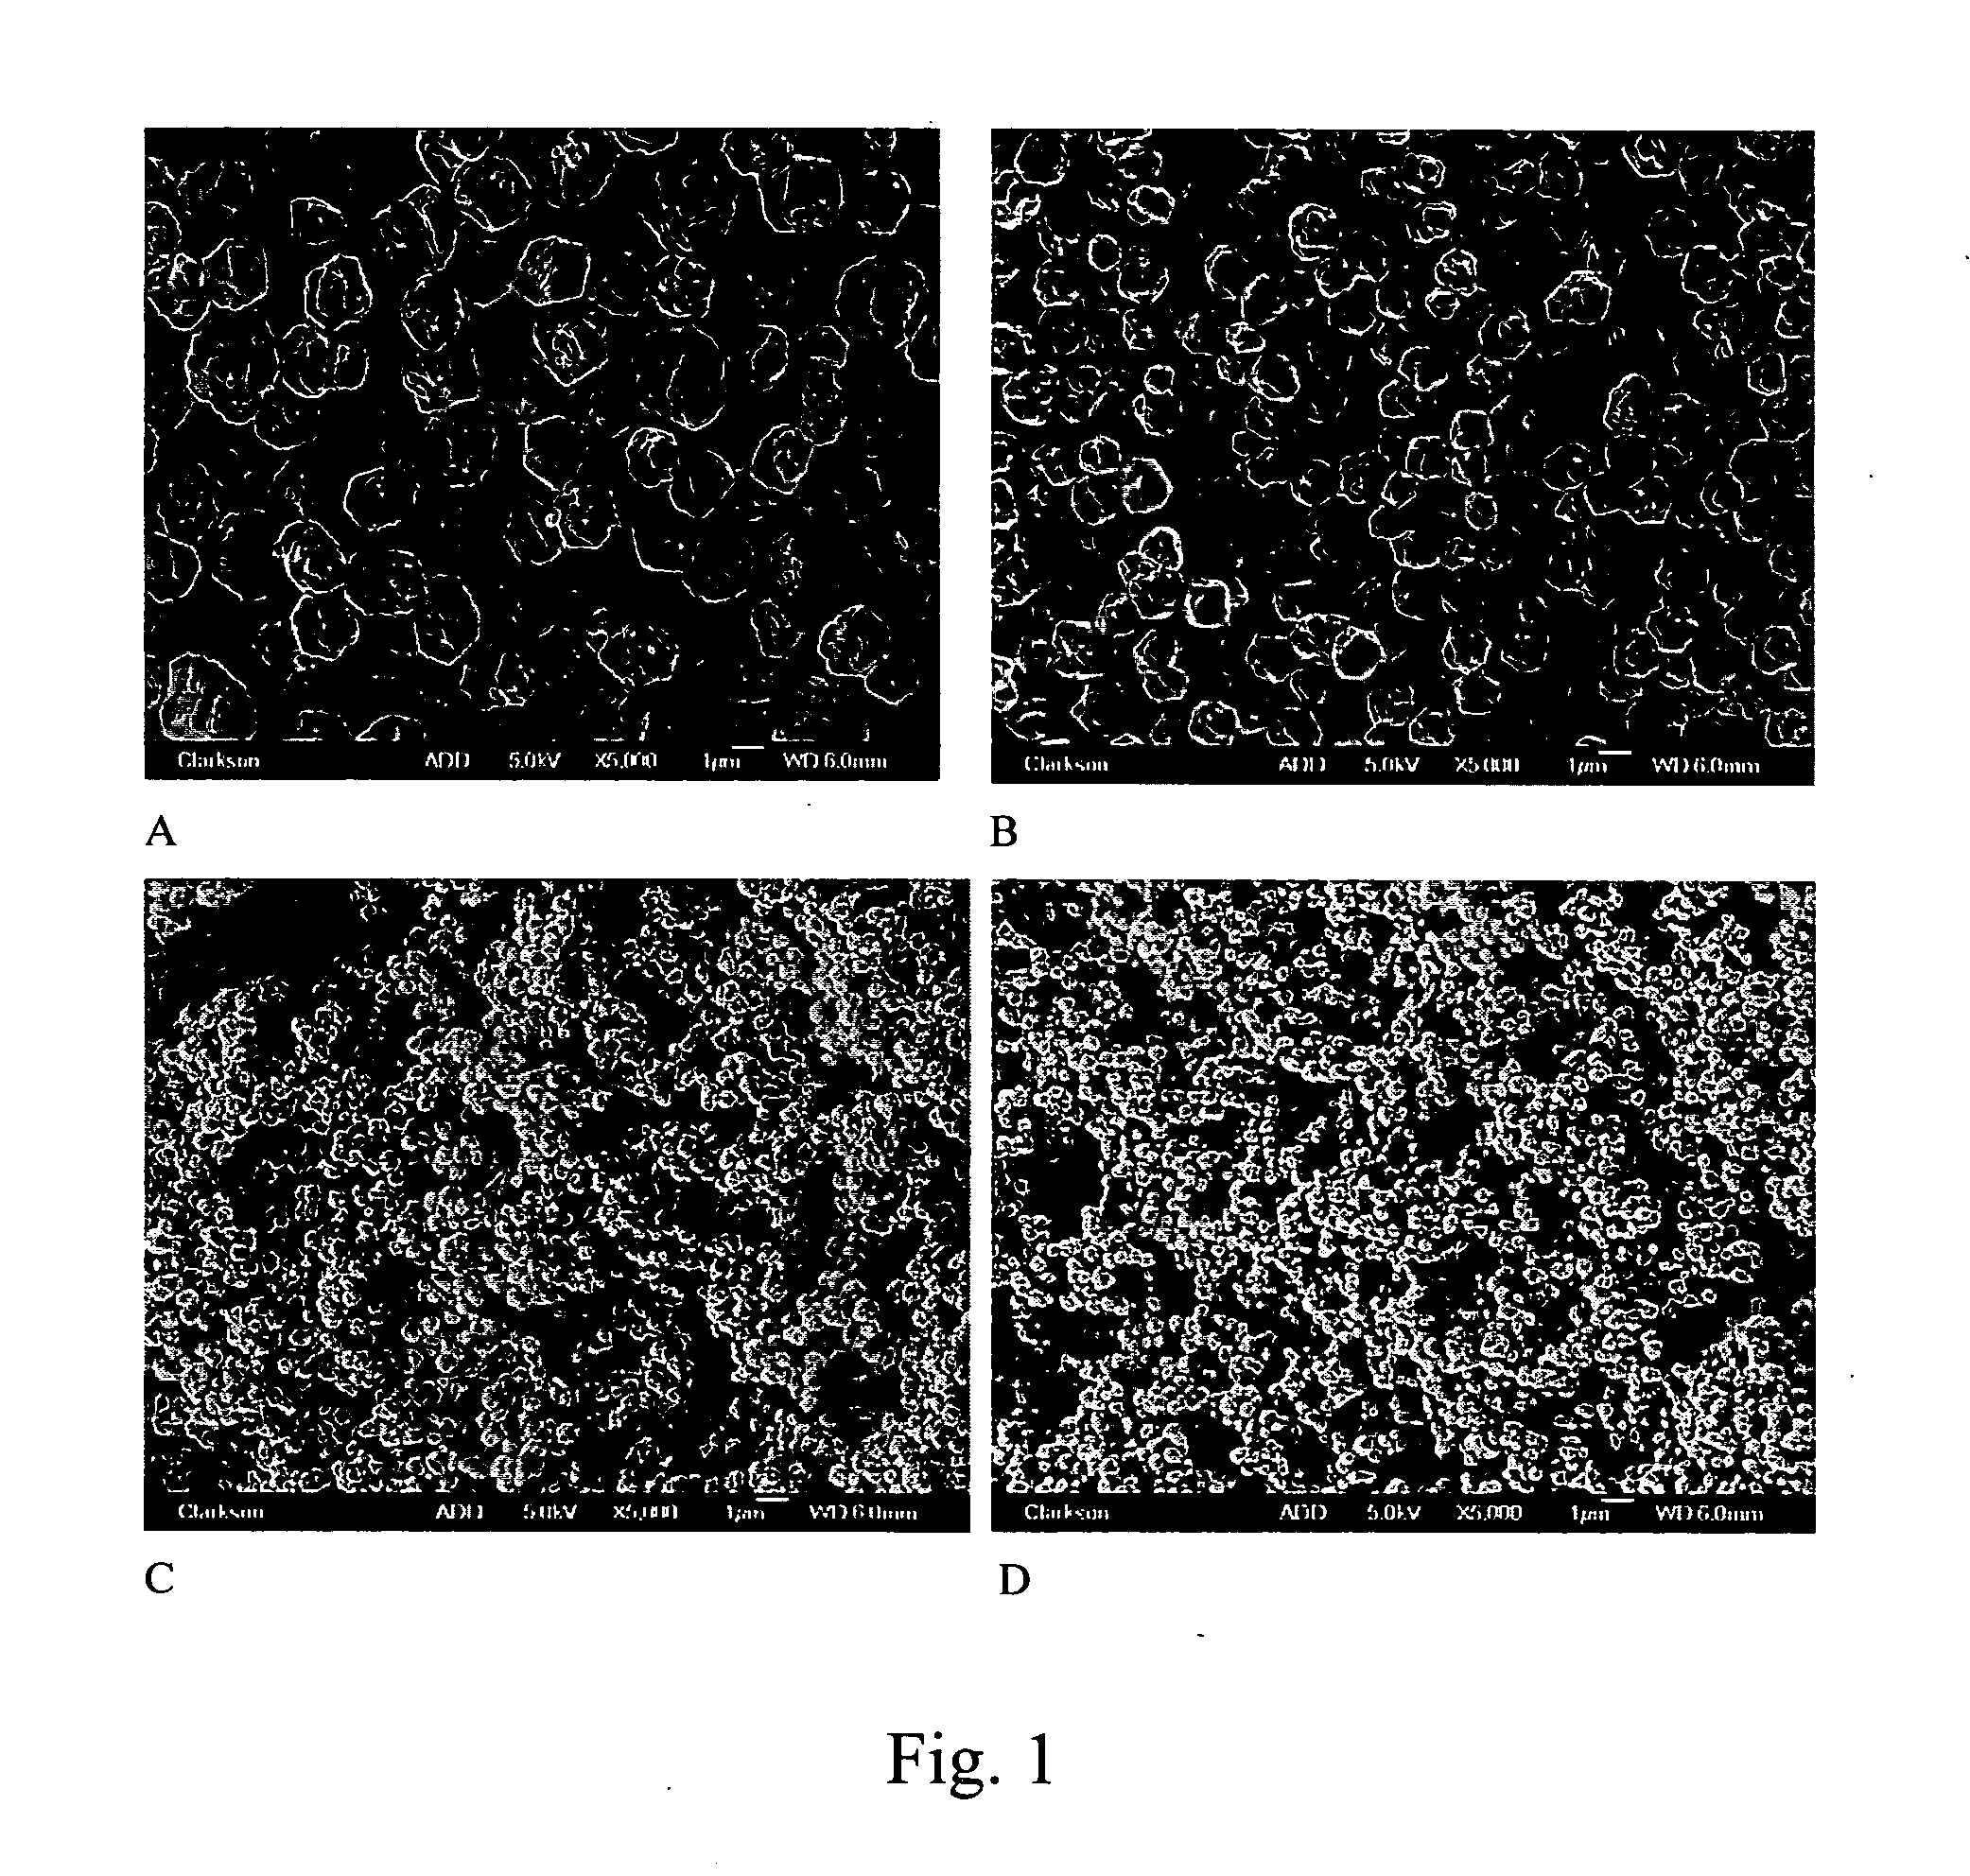 Polyol-based method for producing ultra-fine silver powders